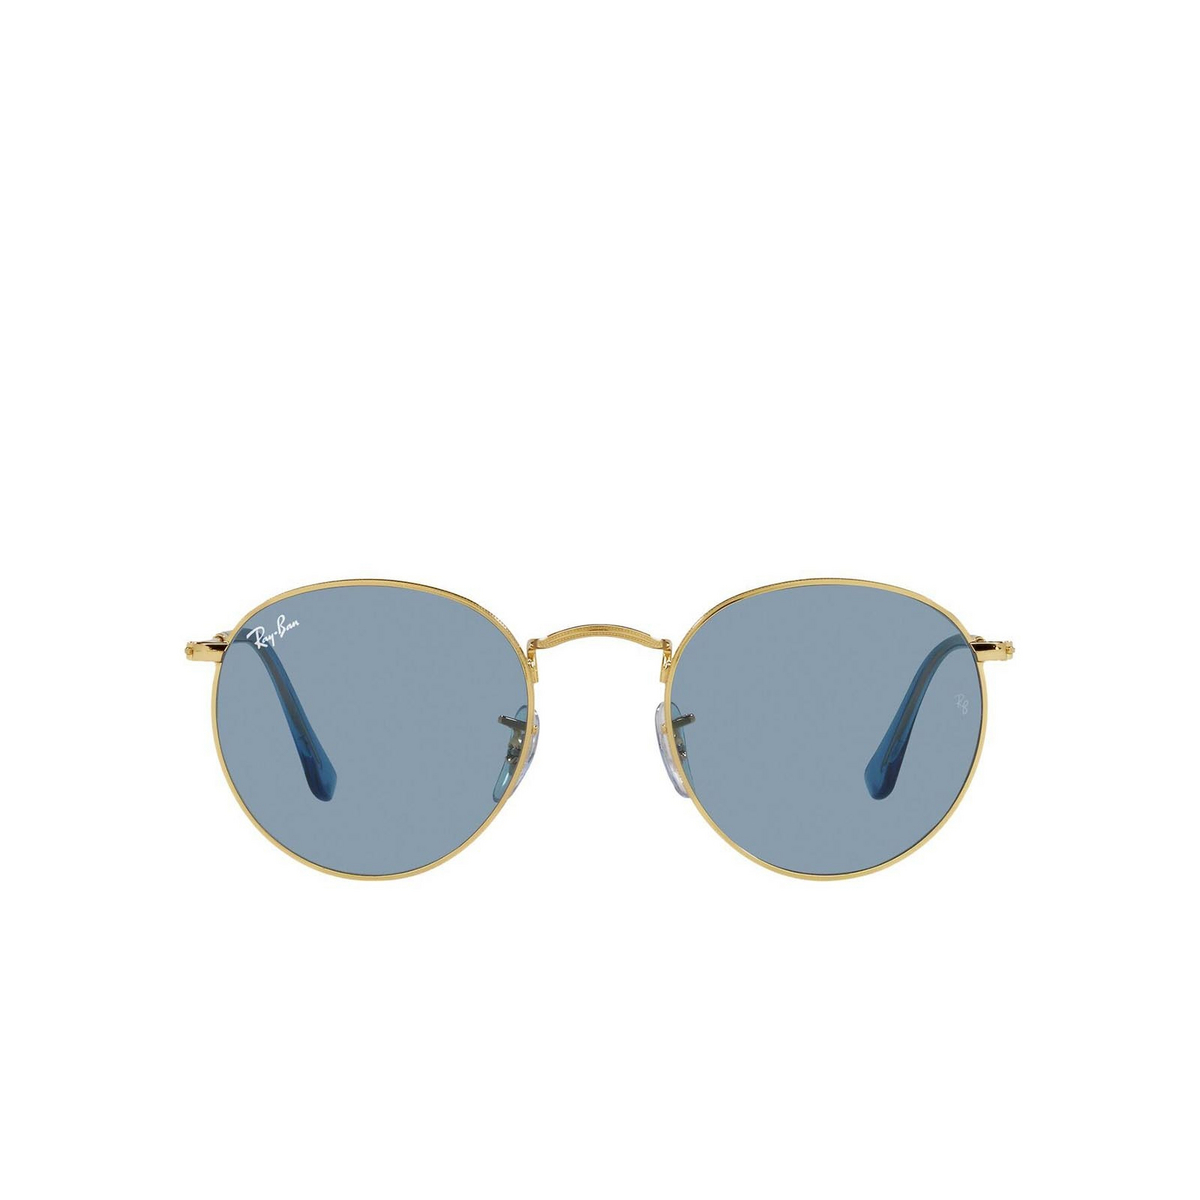 Ray-Ban ROUND METAL Sunglasses 001/56 True Blue - front view